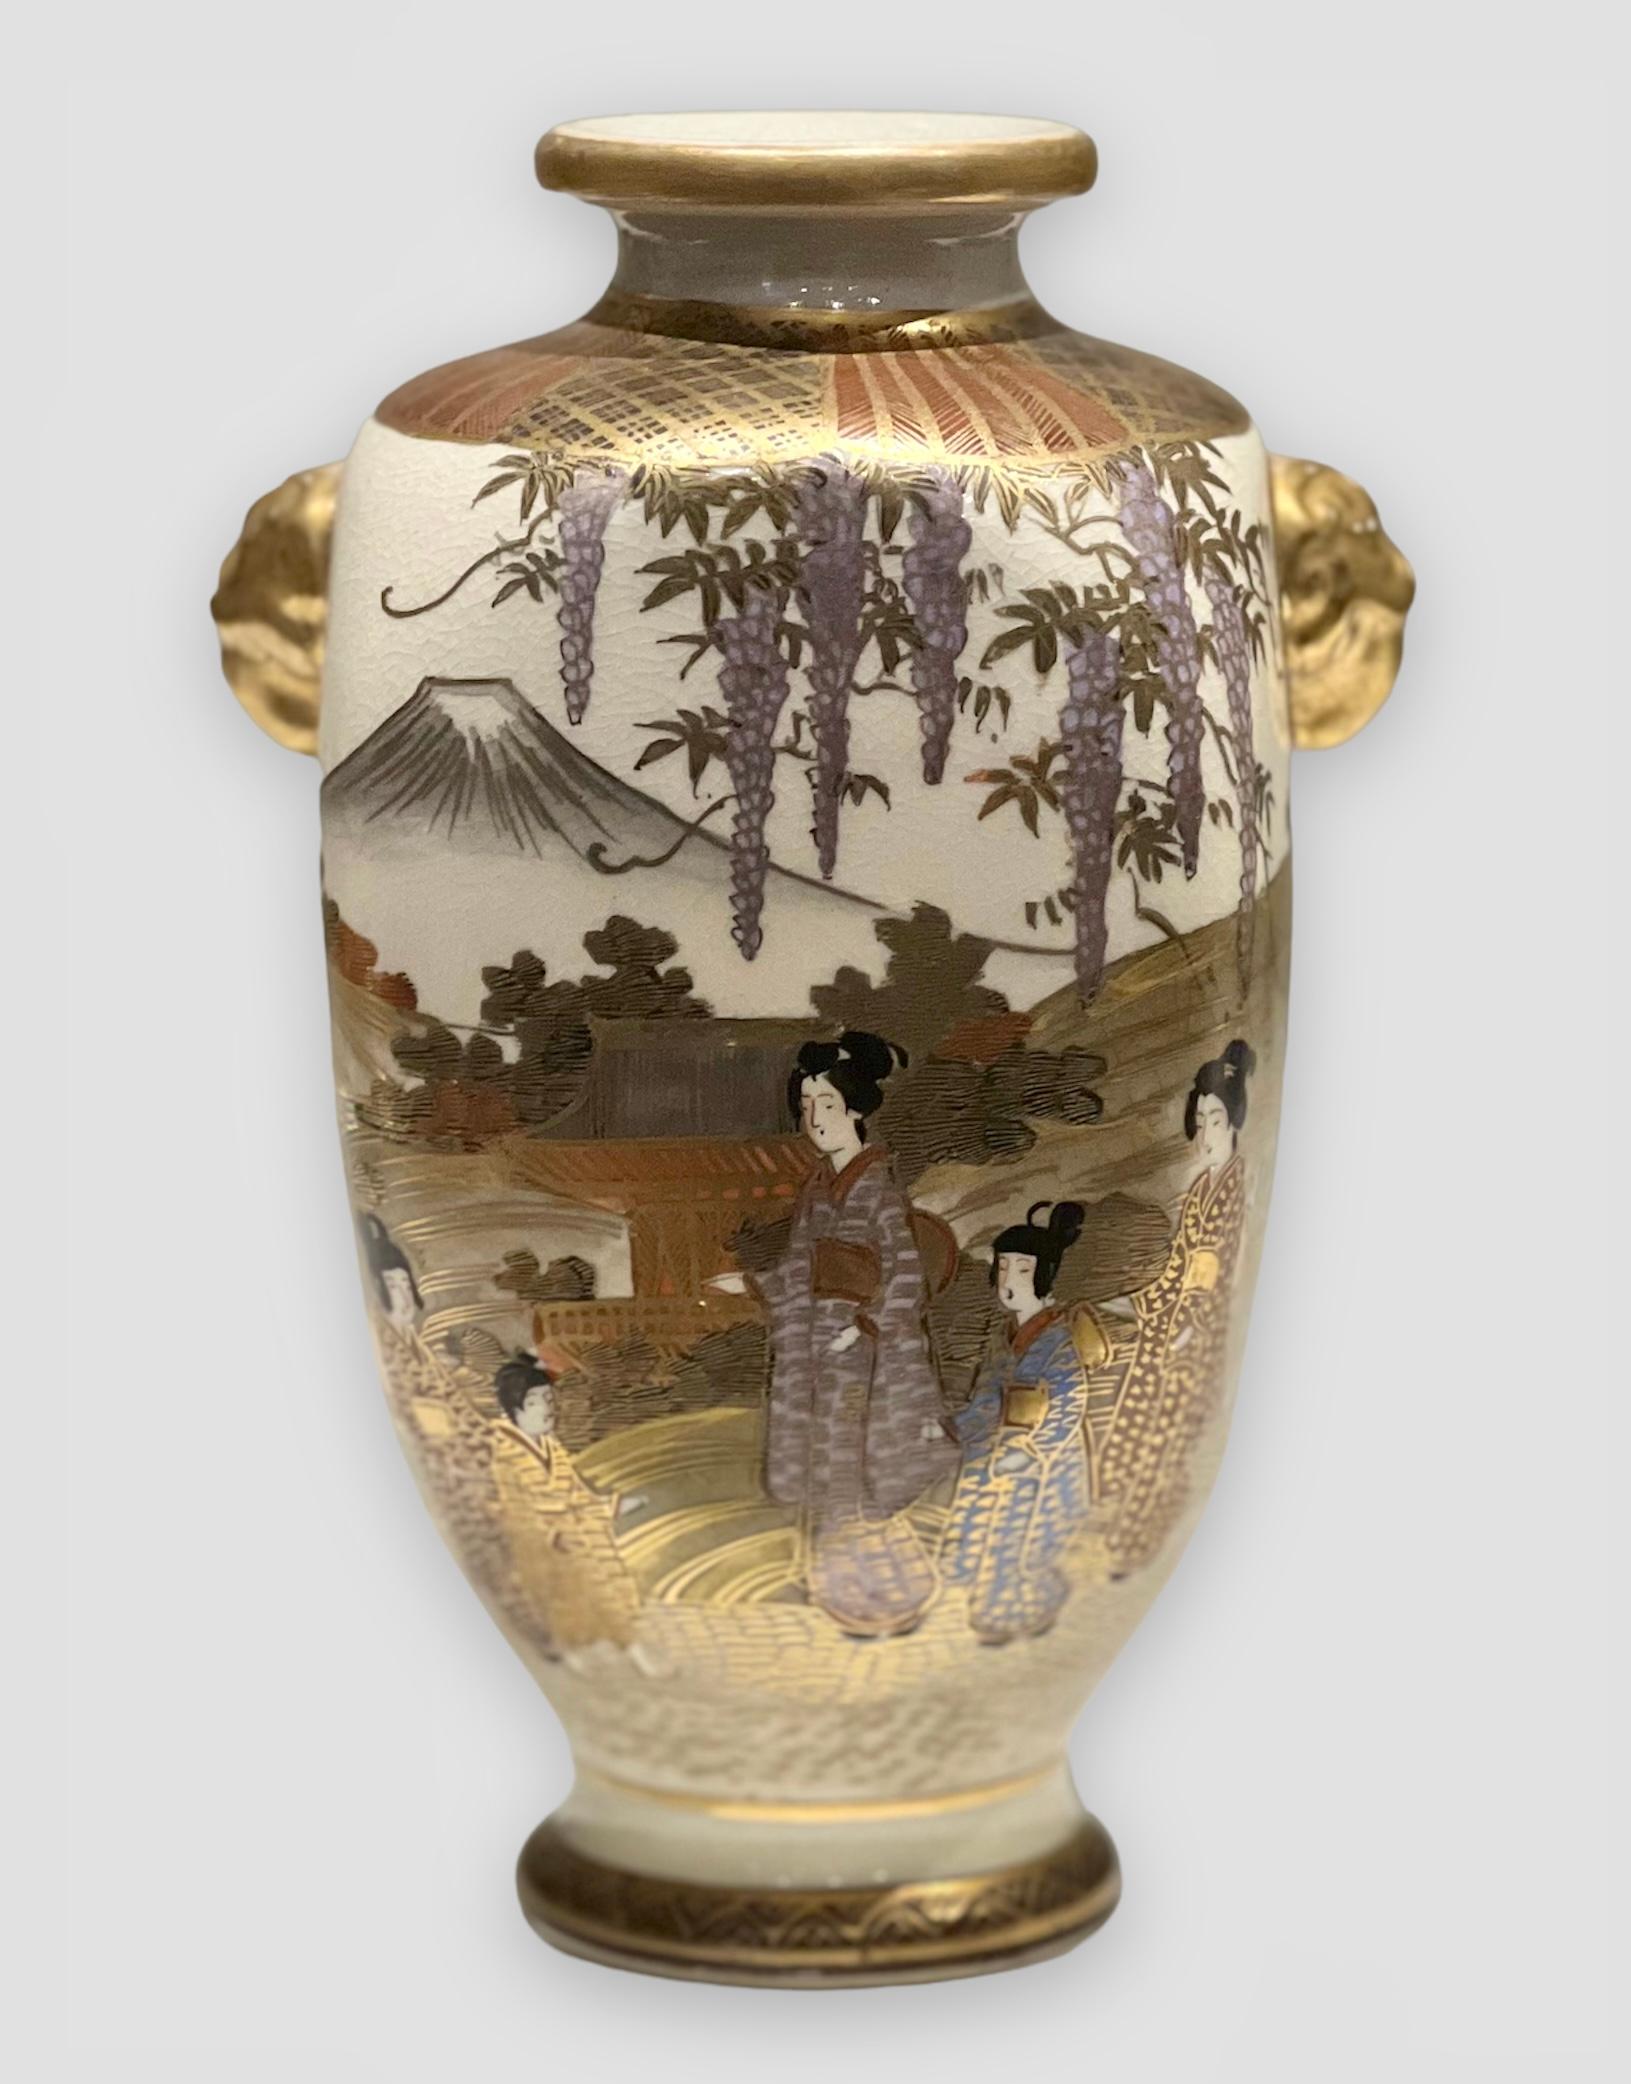 A fine and elegant antique Japanese Satsuma vase. Meiji period. Signed


A Japanese Satsuma earthenware four sided vase painted and gilt with maidens and children in a lakeside setting with blossoming trees, pavilions and mountains beyond